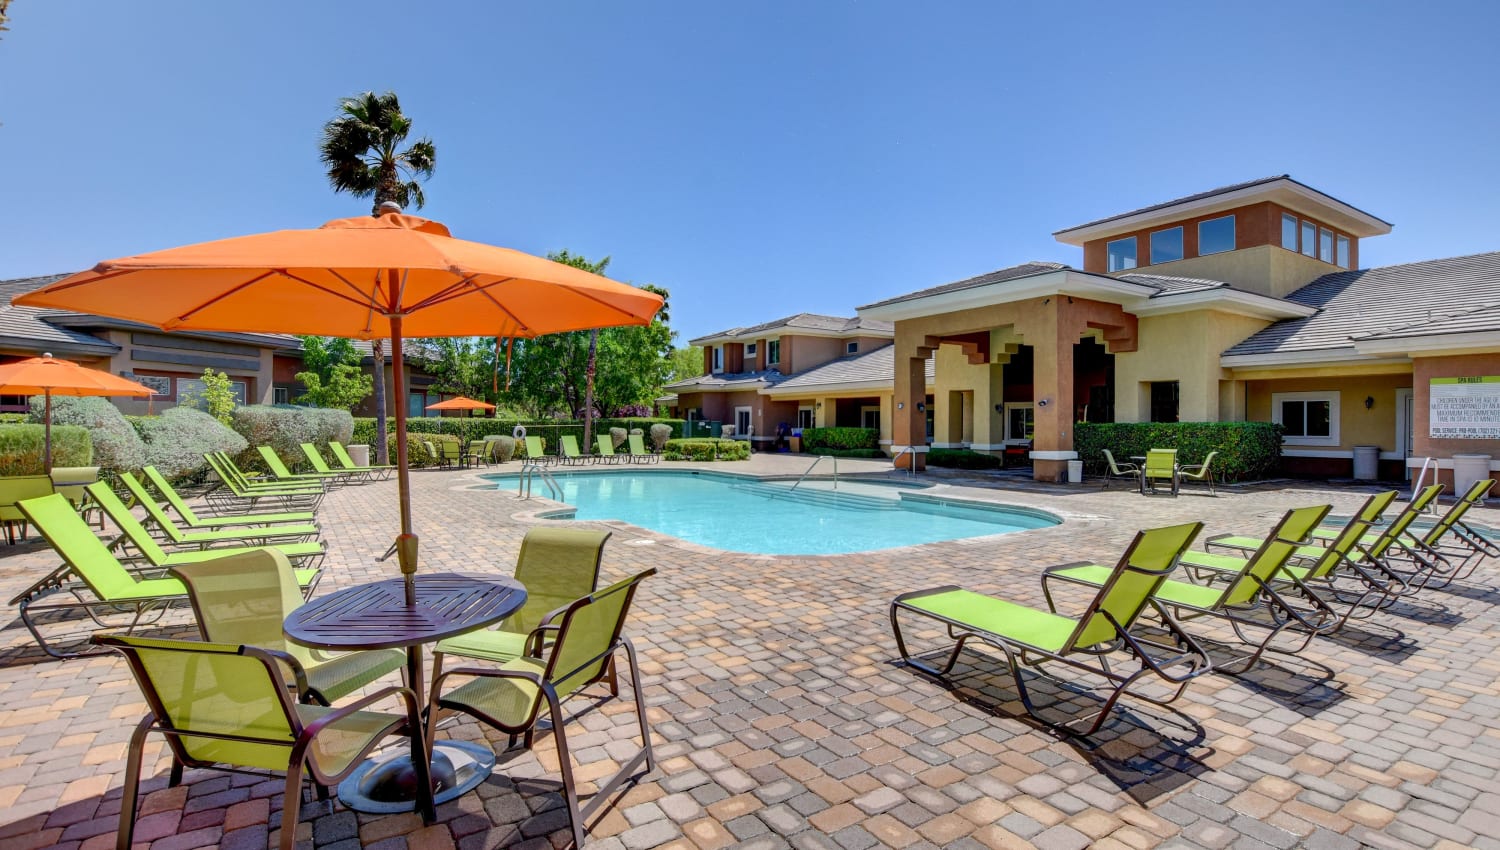 Poolside seating with umbrella at Canyon Villas Apartments in Las Vegas, Nevada